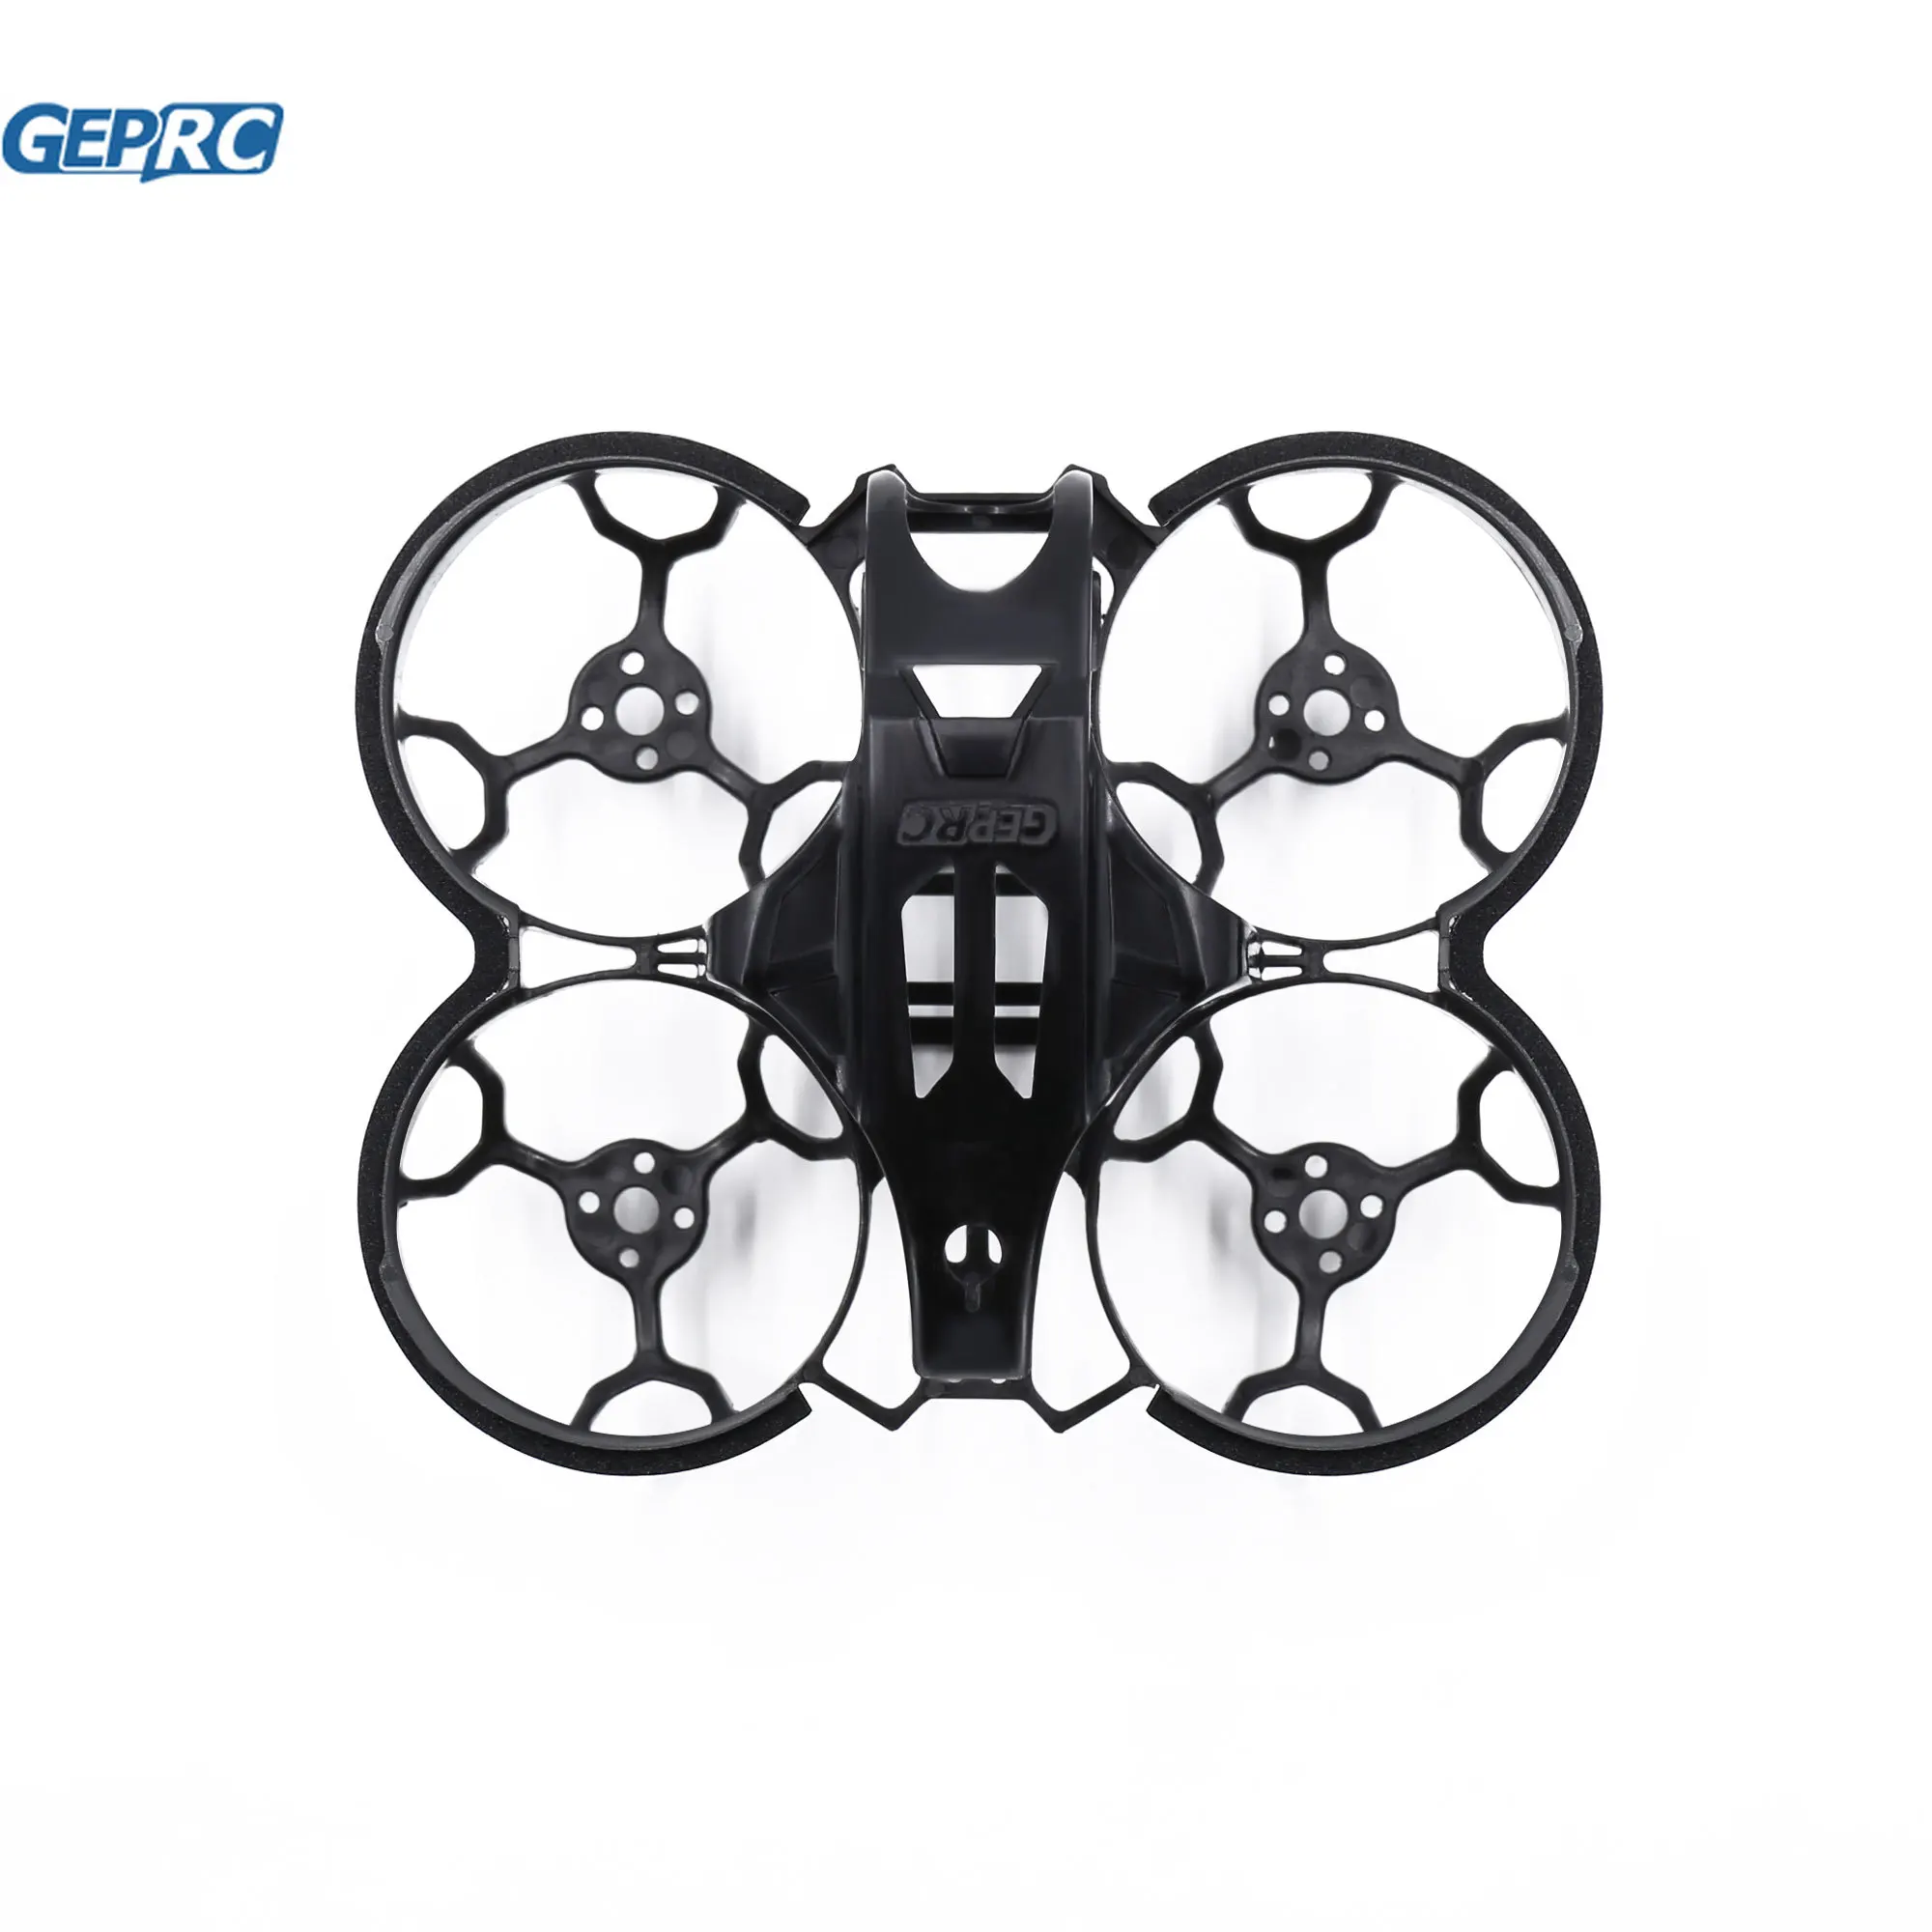 GEPRC GEP-TG Frame Suitable For Tinygo Series Drone RC DIY FPV Quadcopter Drone Replacement Accessories Parts